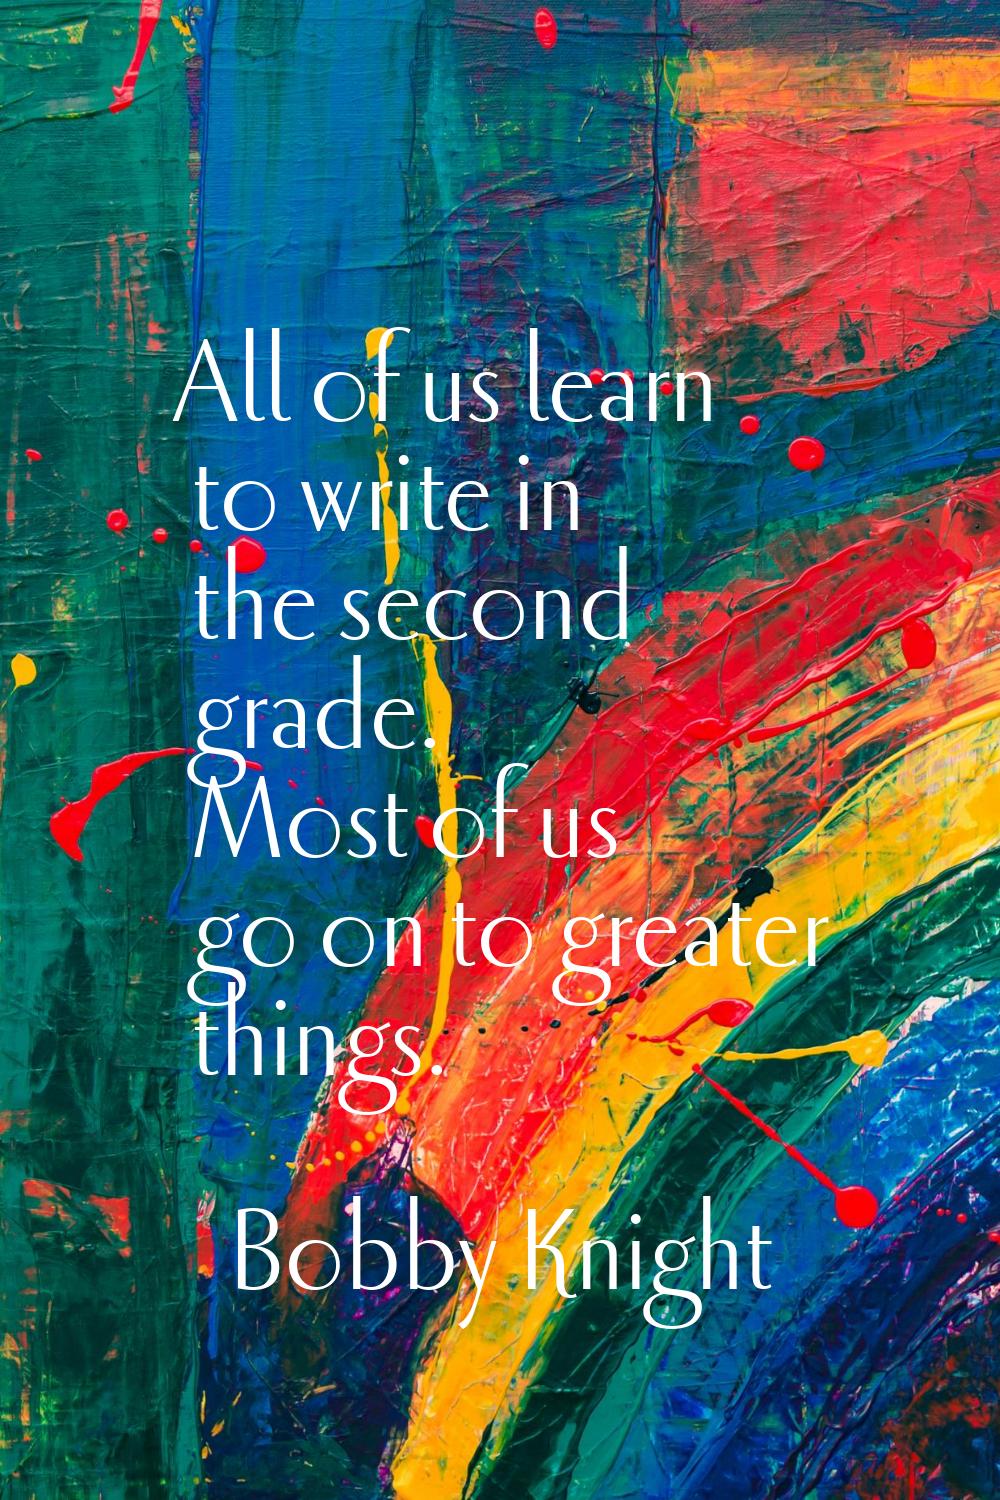 All of us learn to write in the second grade. Most of us go on to greater things.